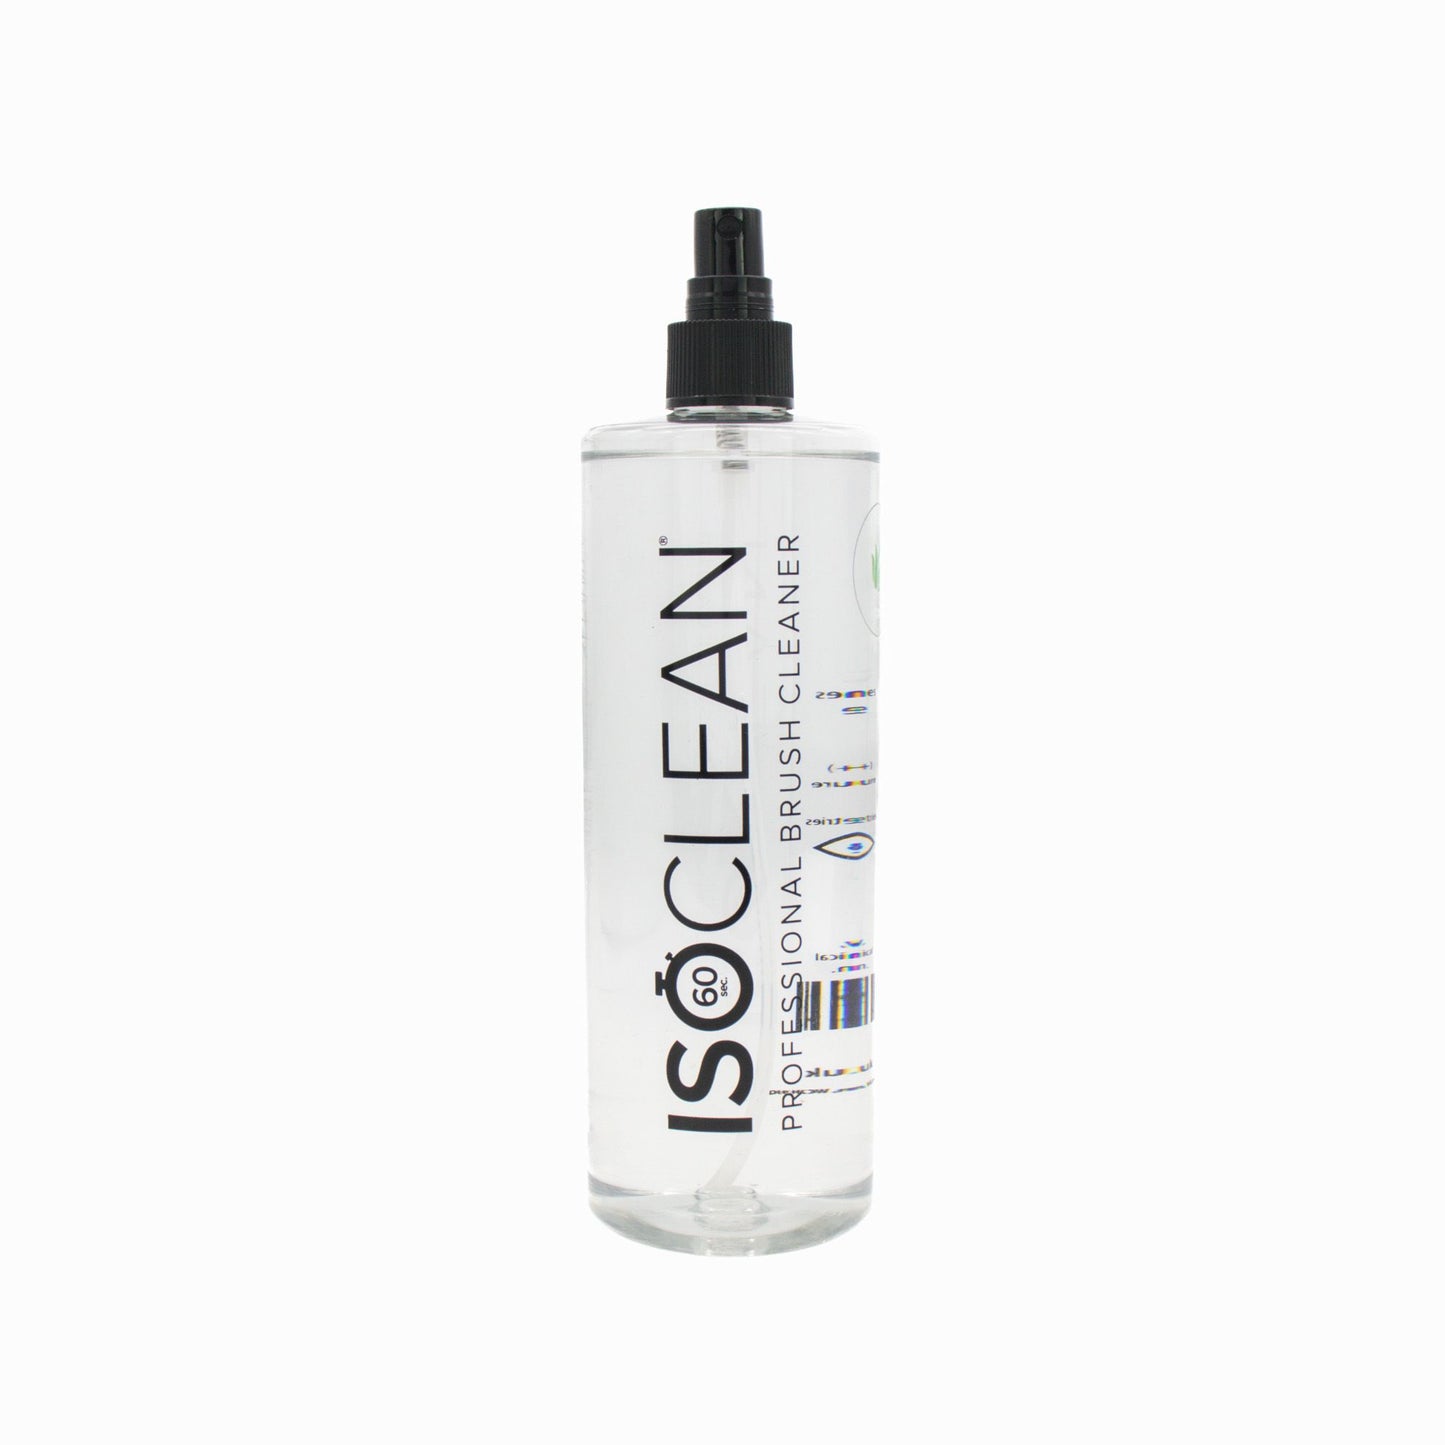 ISOCLEAN Professional Brush Cleaner 525ml - Missing Lid